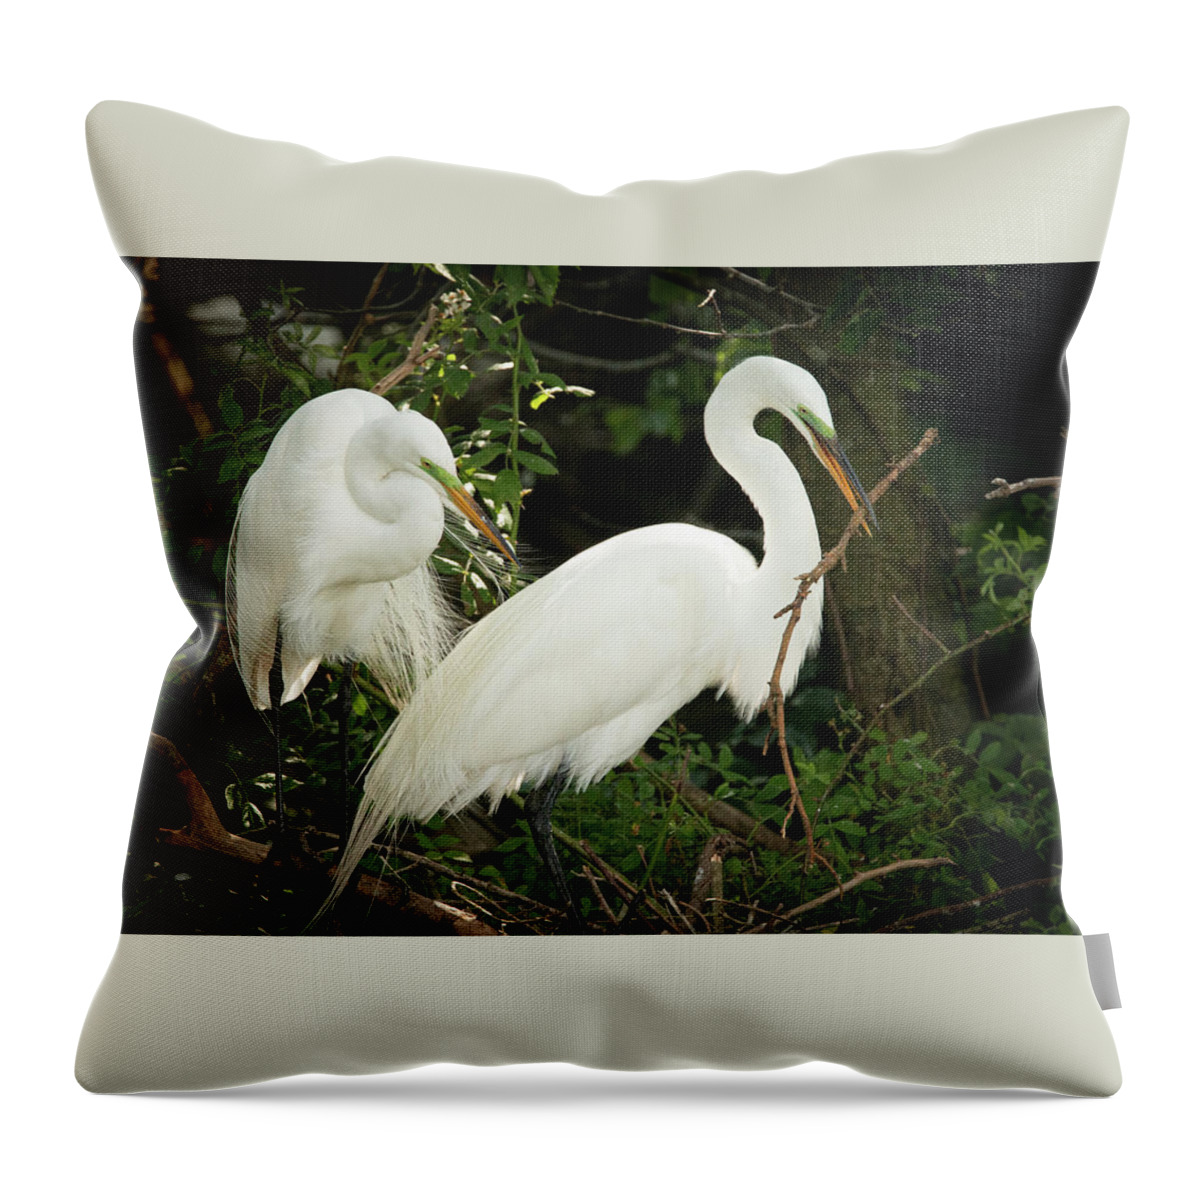 Wildlife Throw Pillow featuring the photograph Great Egret Pair Nest Building by Kristia Adams